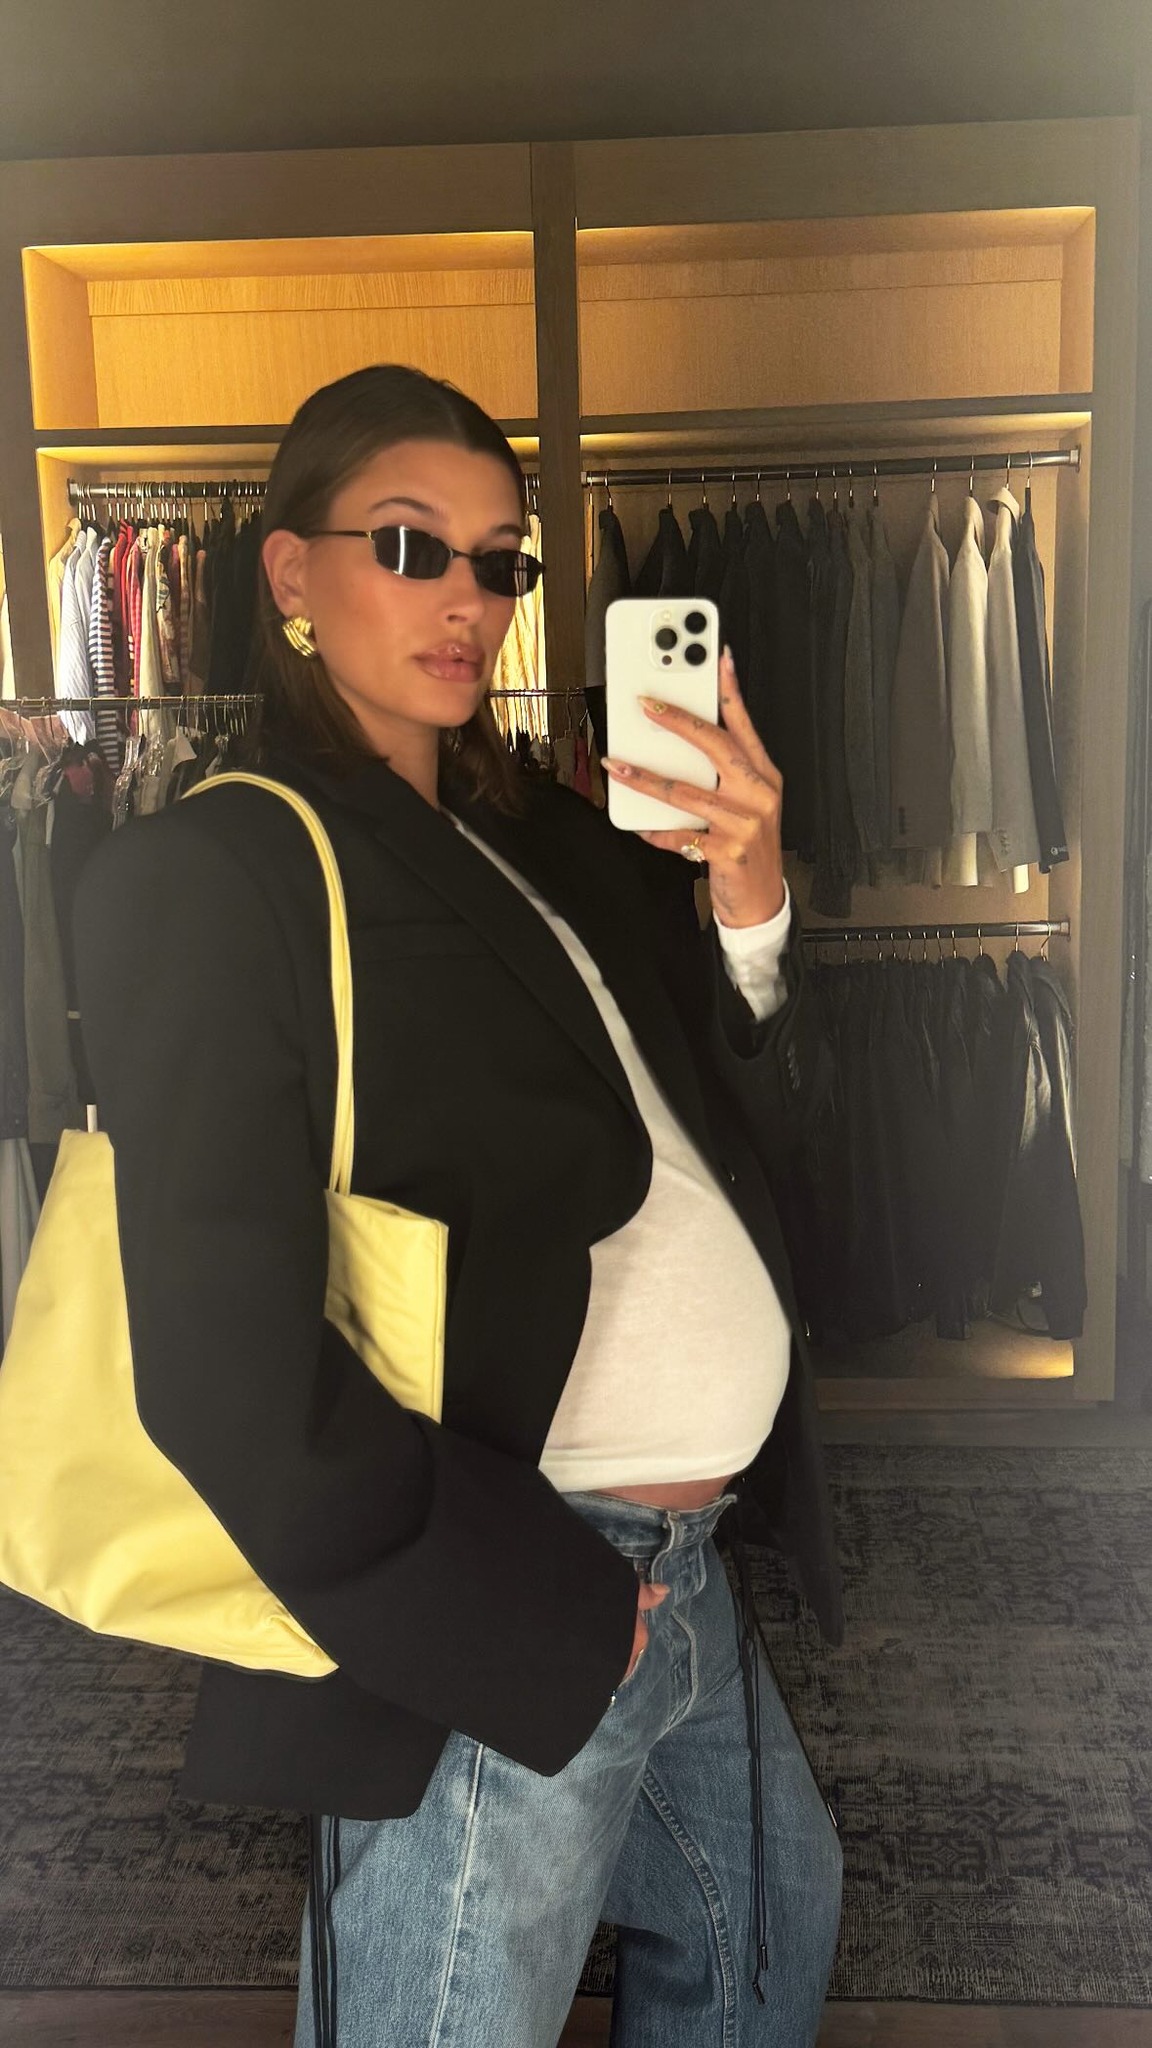 Hailey Bieber shows off her baby bump in a form-fitting white top and low-rise jeans